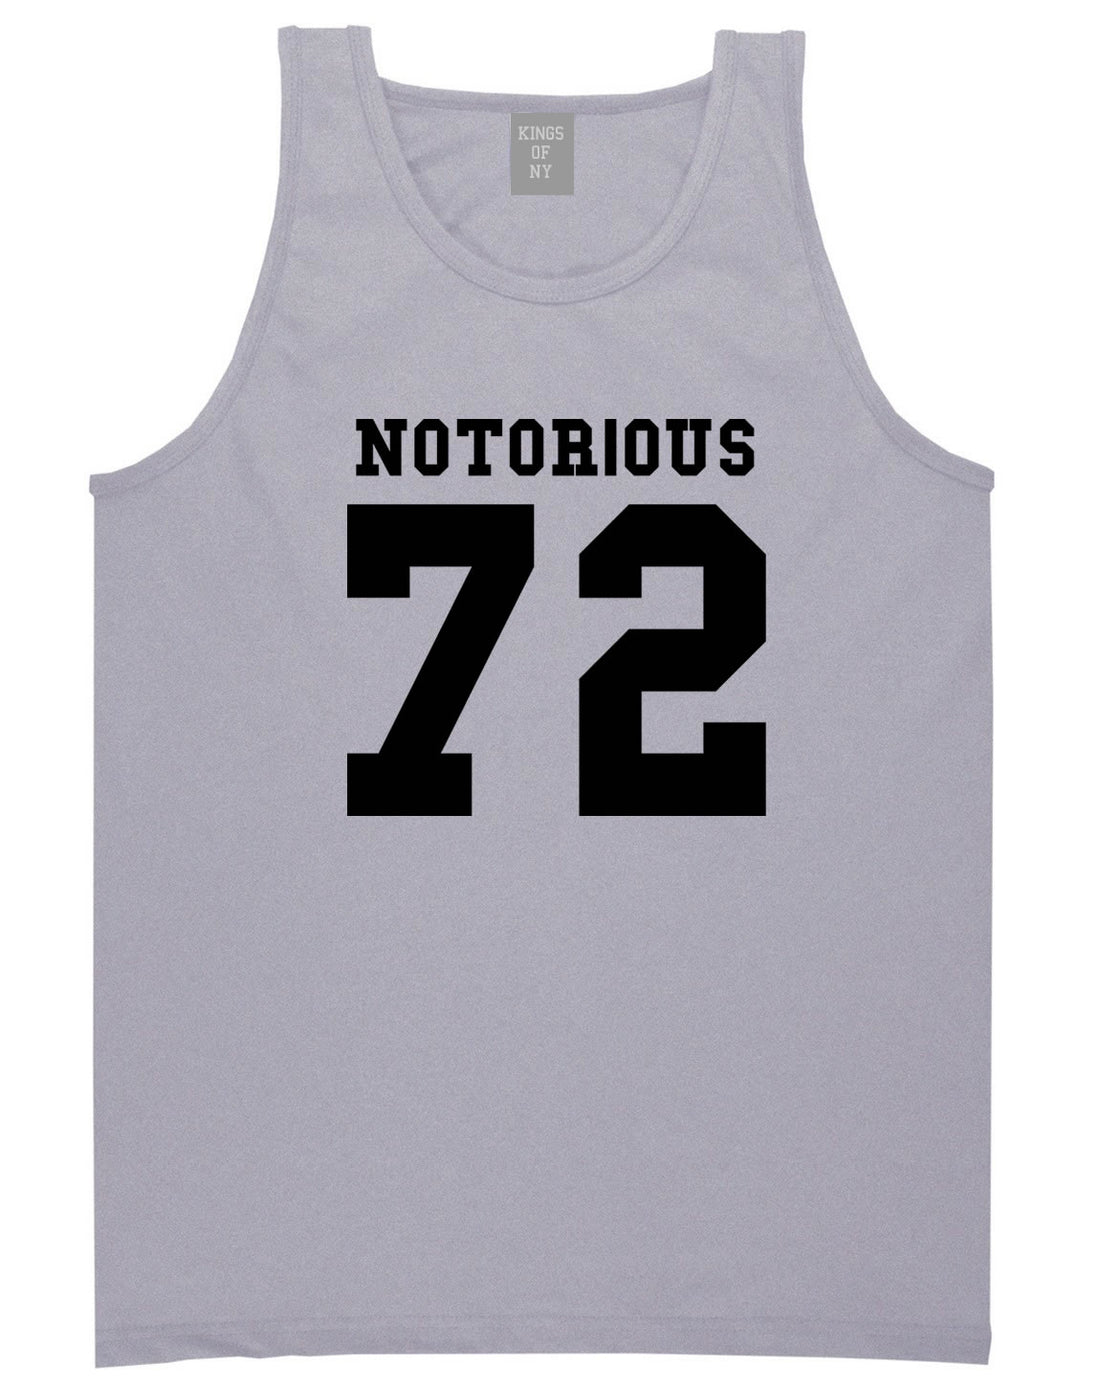 Notorious 72 Team Tank Top in Grey by Kings Of NY